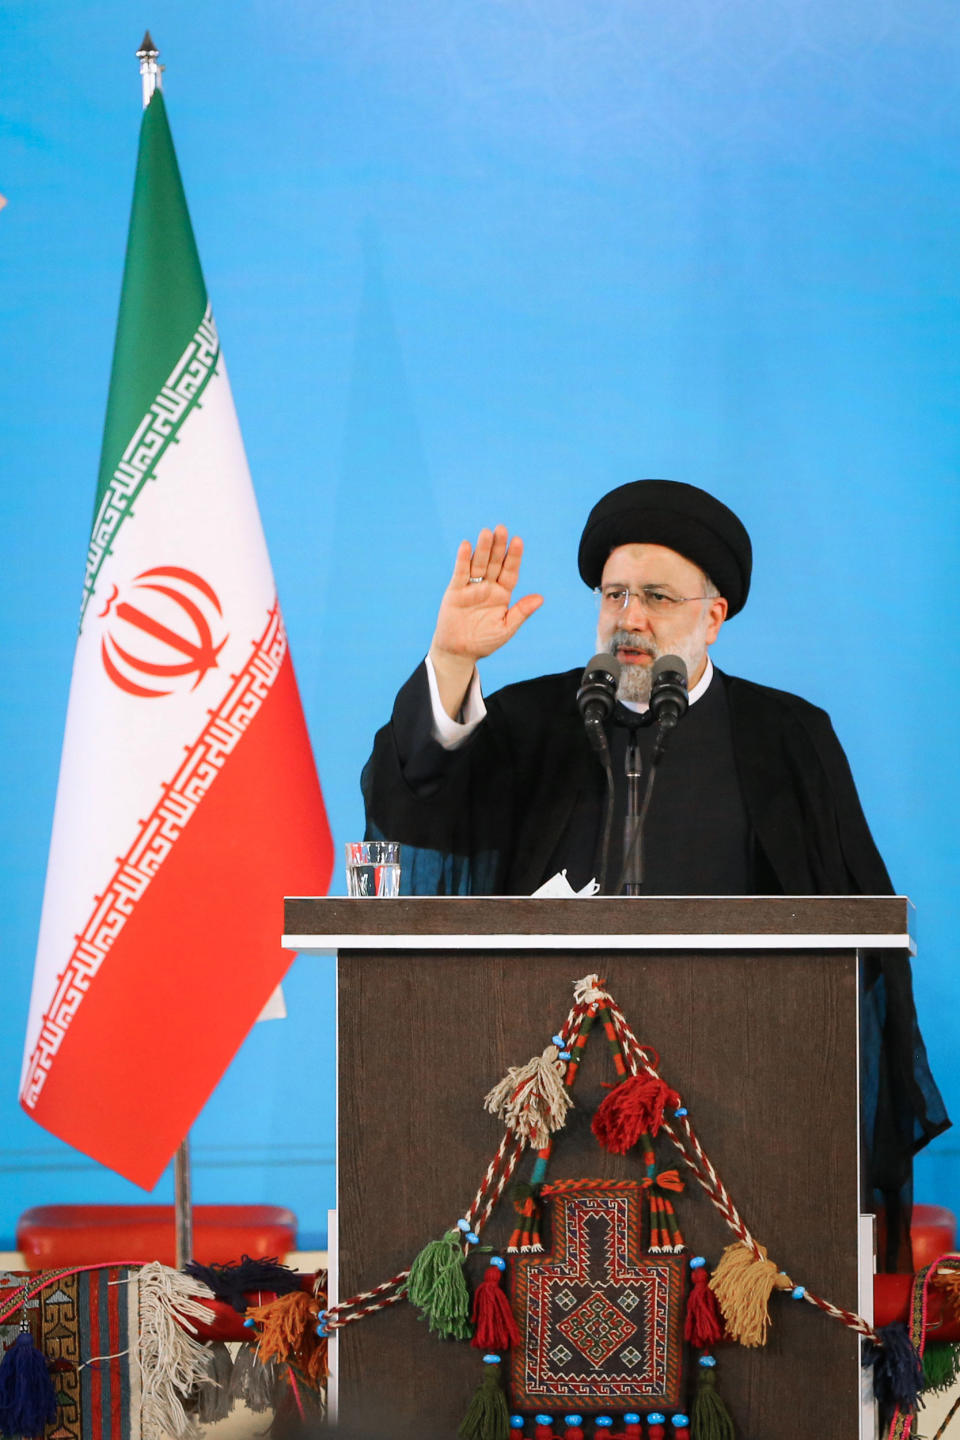 In this photo released by the official website of the office of the Iranian Presidency, President Ebrahim Raisi waves to a crowd during a visit to central city of Shar-e Kord, Iran, Thursday, June 9, 2022. A day after the International Atomic Energy Agency's board of governors censured Tehran for failing to provide "credible information" over man-made nuclear material found at three undeclared sites in the country, President Raisi took a firm stance saying Iran will not withdraw from its position. (Iranian Presidency Office via AP)